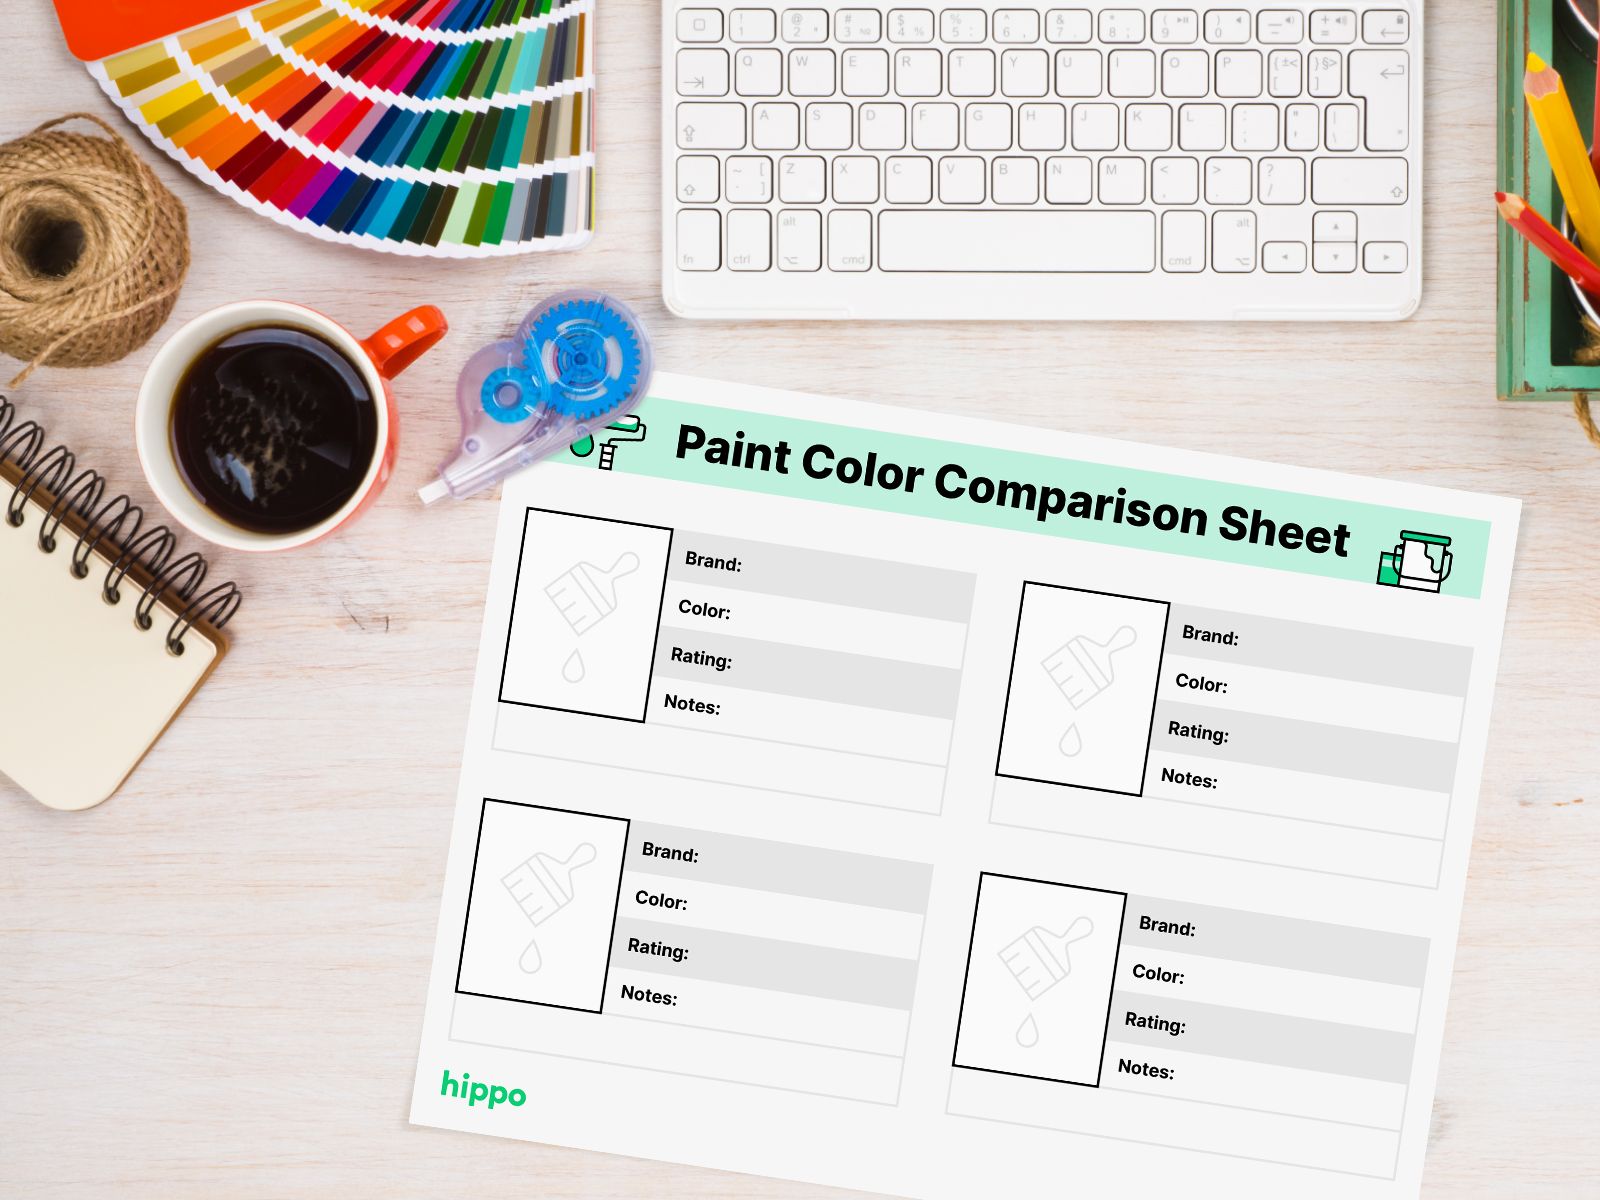 Paint comparison printable on a table by a cup of coffee and color swatches